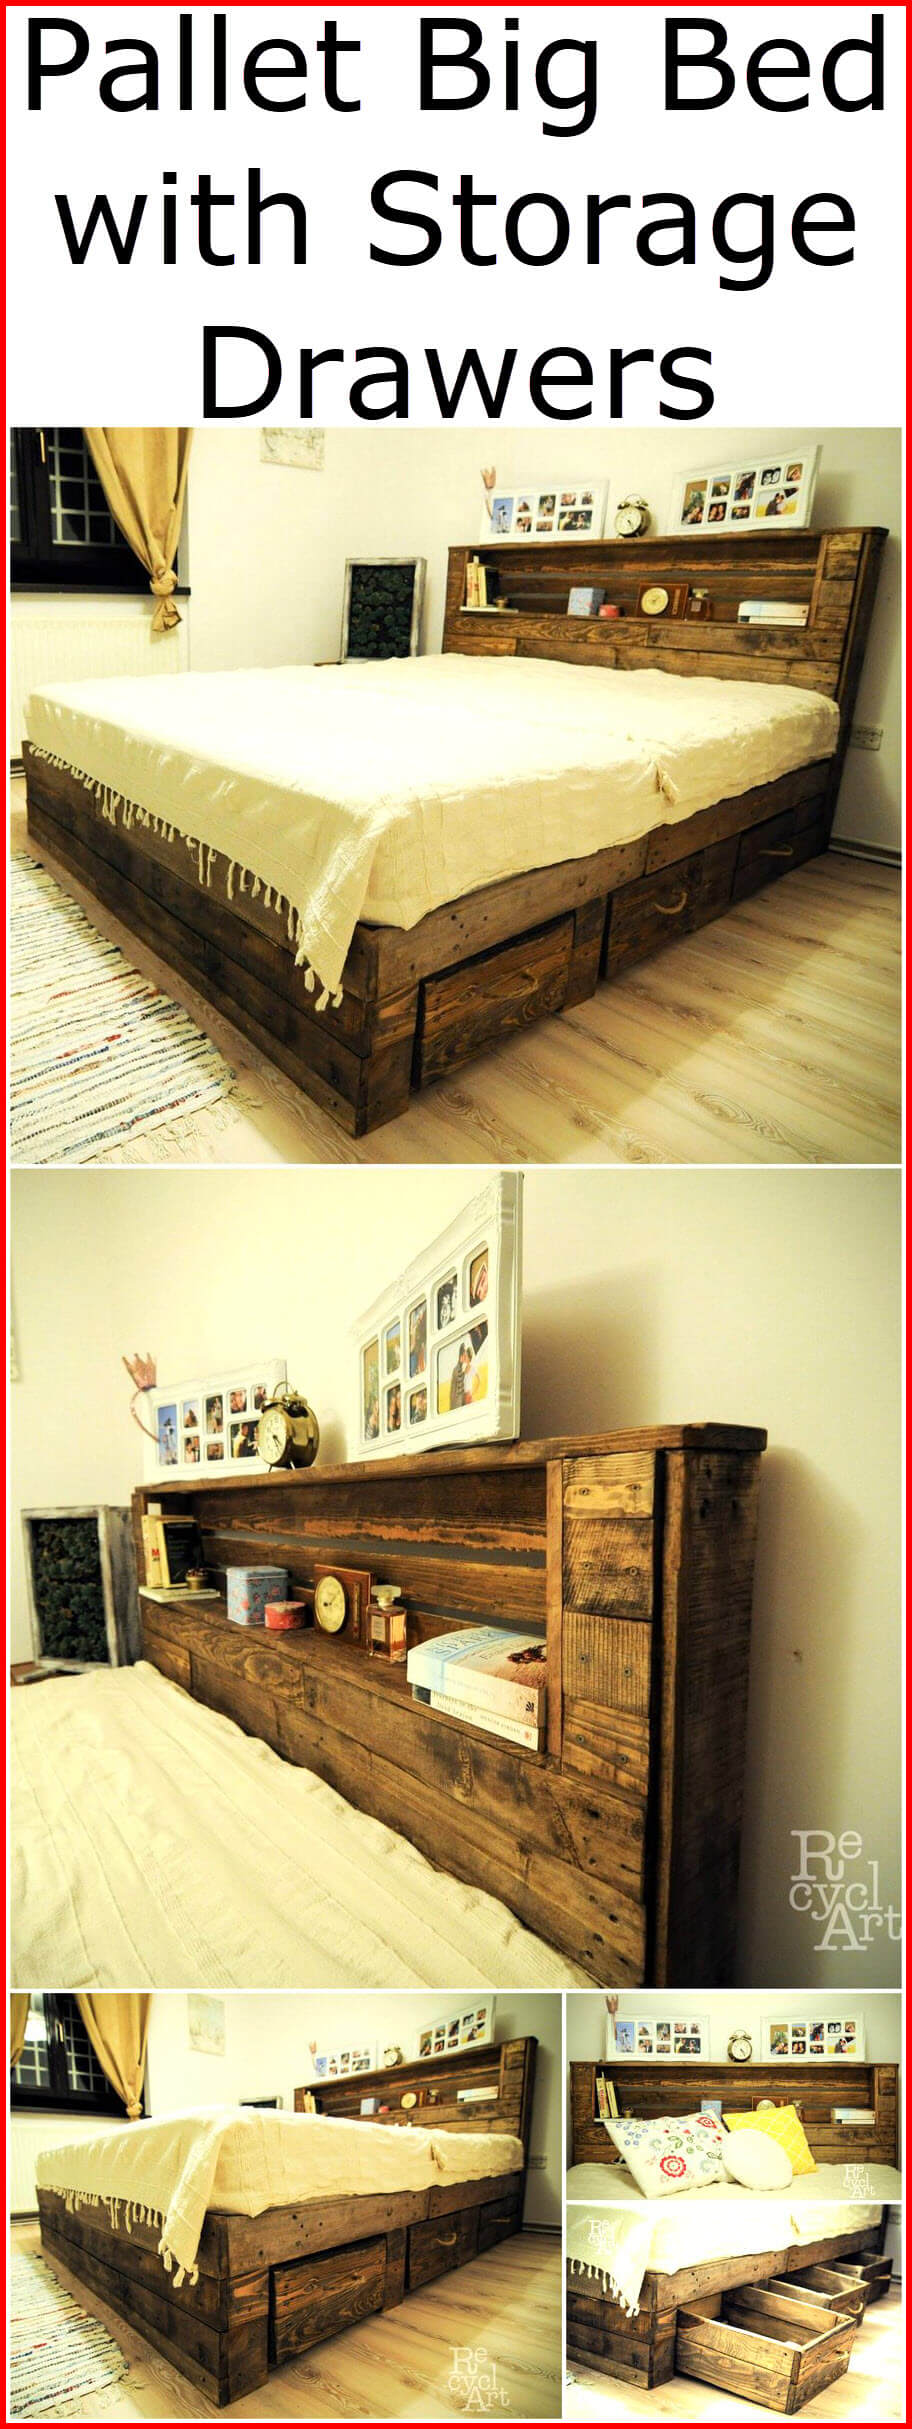 Pallet Big Bed with Storage Drawers